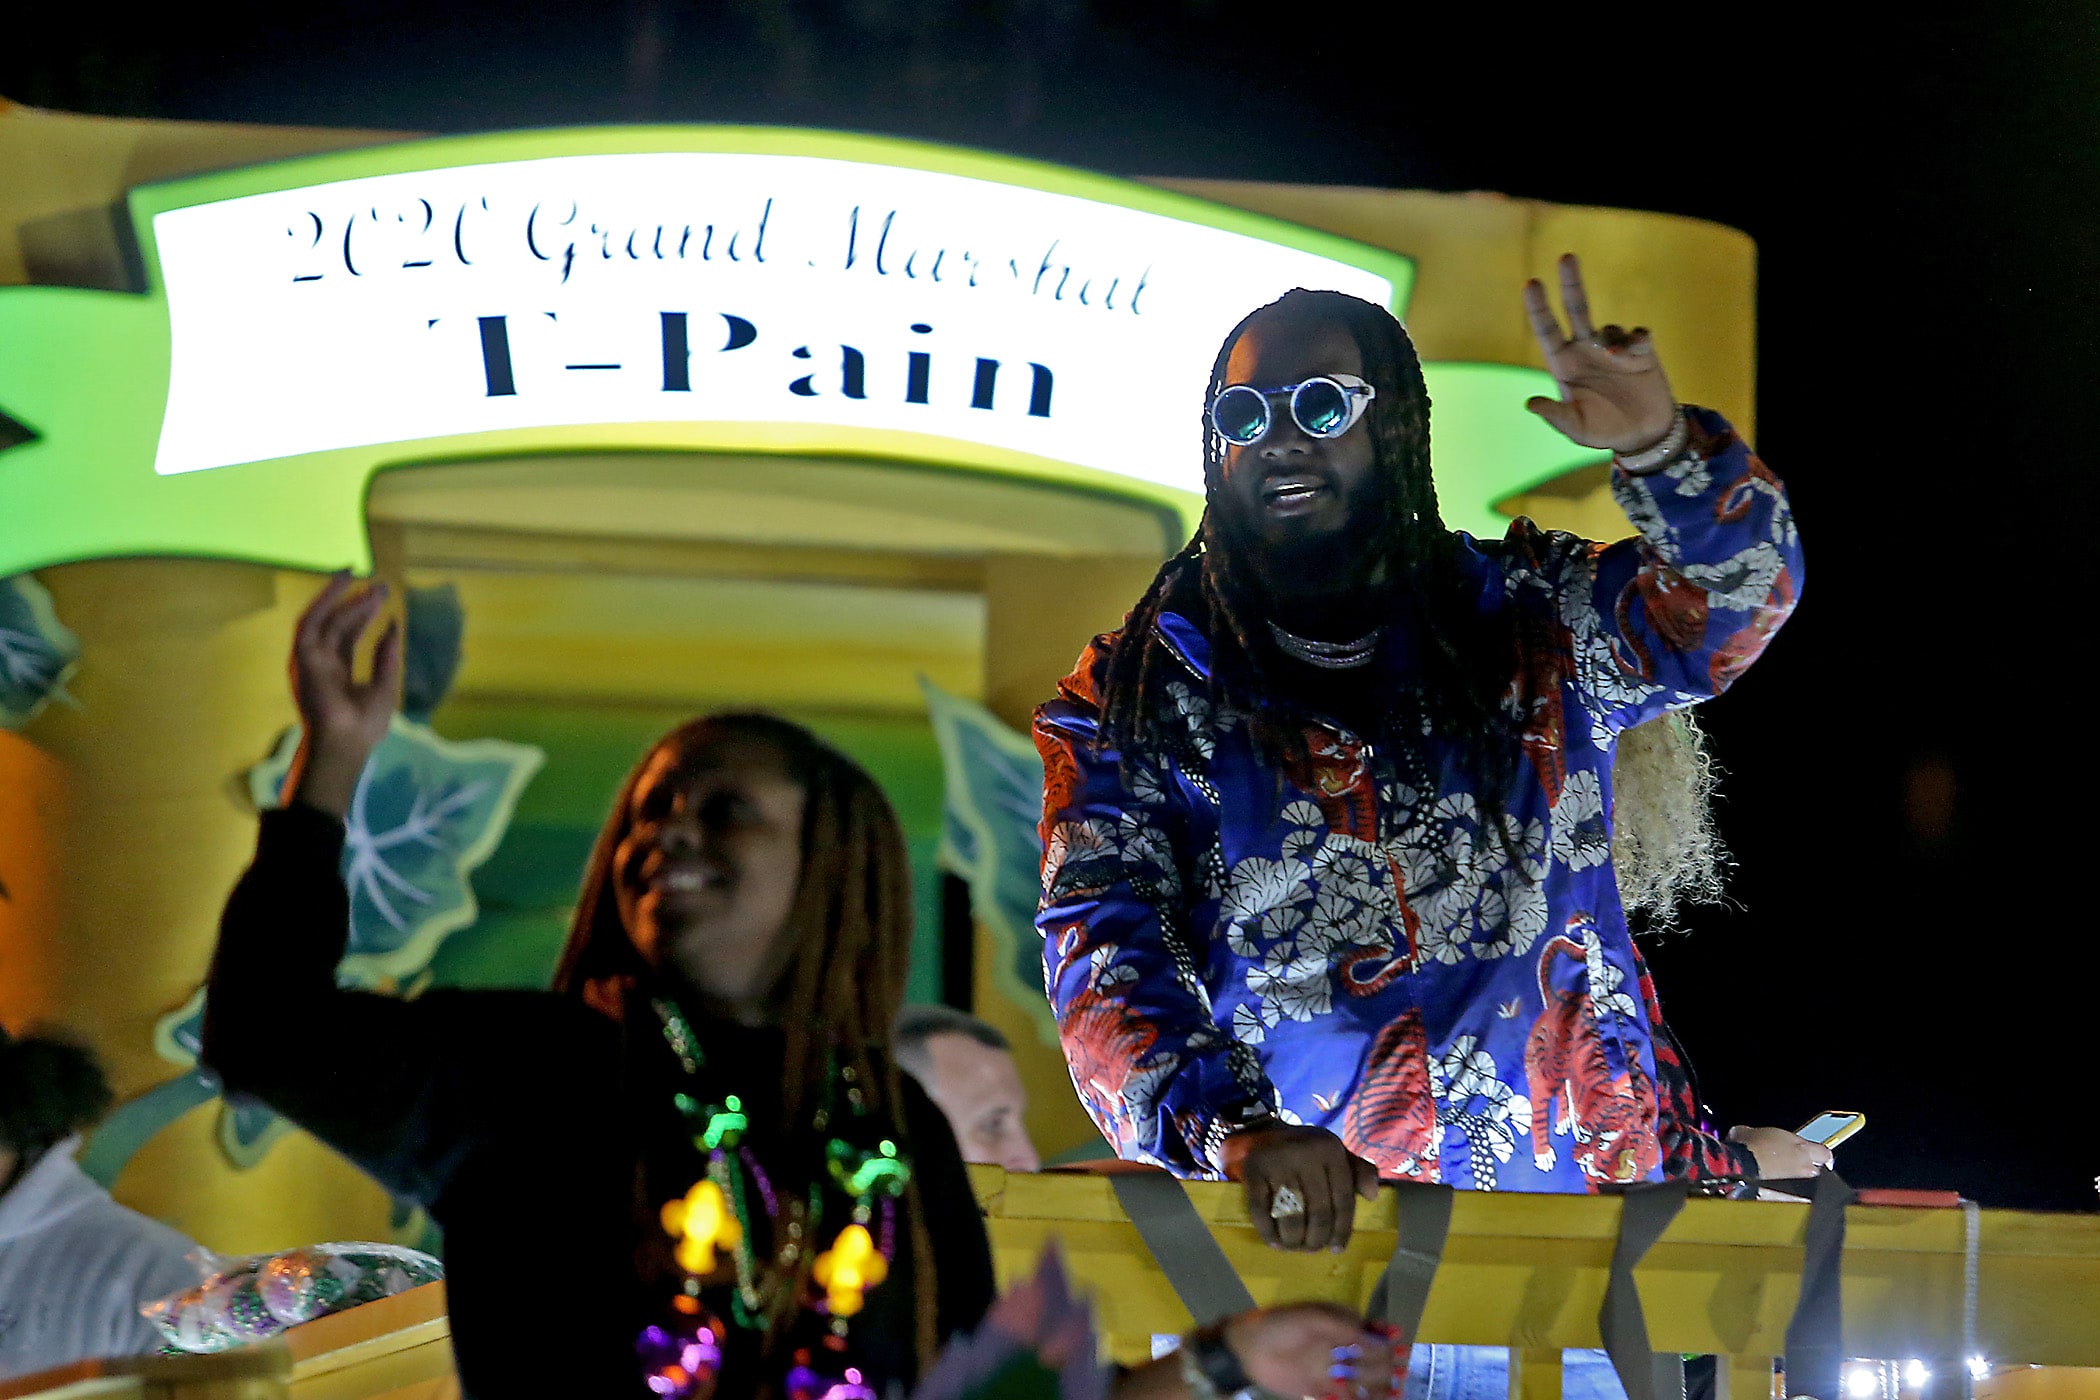 Grand Marshal T-Pain waves to the crowd as the 550 members of Pygmalion roll down the Uptown parade route with an Italy-themed 25-float parade entitled “Viaggia in Italia”. Cary Oswald reigned as King Pygmalion and Kalli Mercer was Queen Pygmalion as the krewe presented their 21st annual parade on Saturday, February 15, 2020. (Photo by Michael DeMocker)